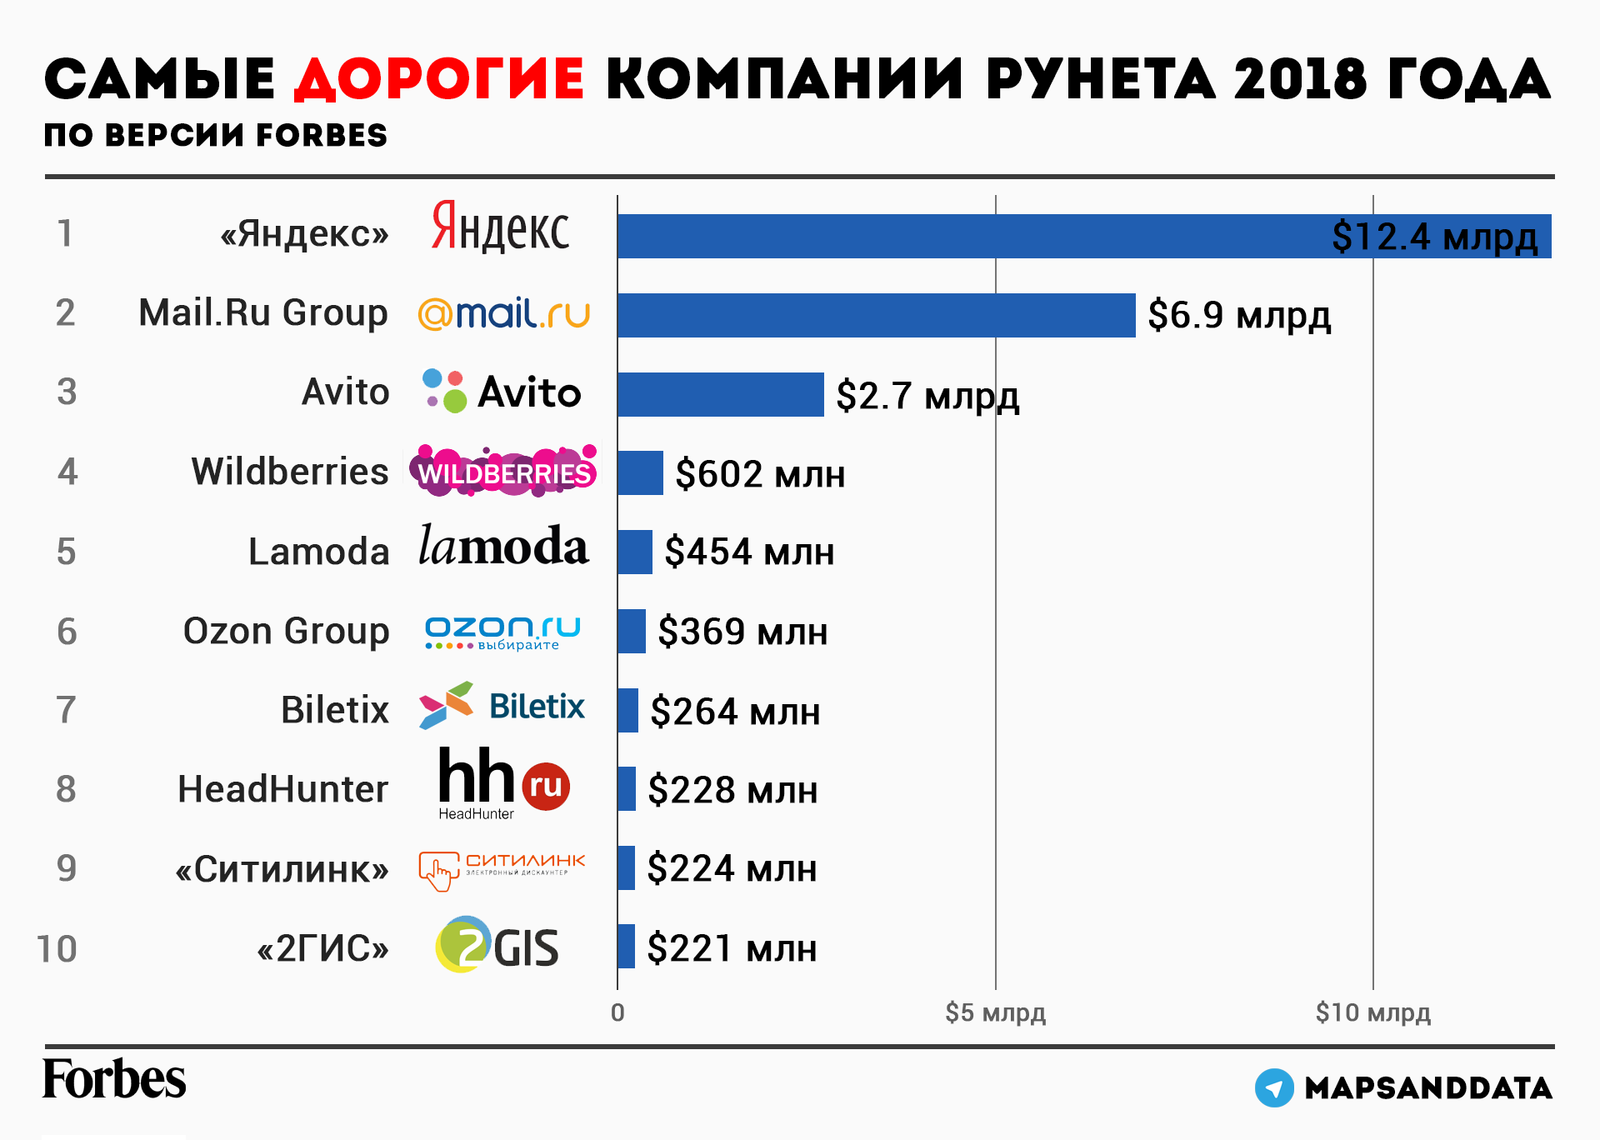 Forbes named the most expensive Runet companies for 2018 - My, Rating, Yandex., Avito, Mail ru, Statistics, Infographics, Forbes, Google